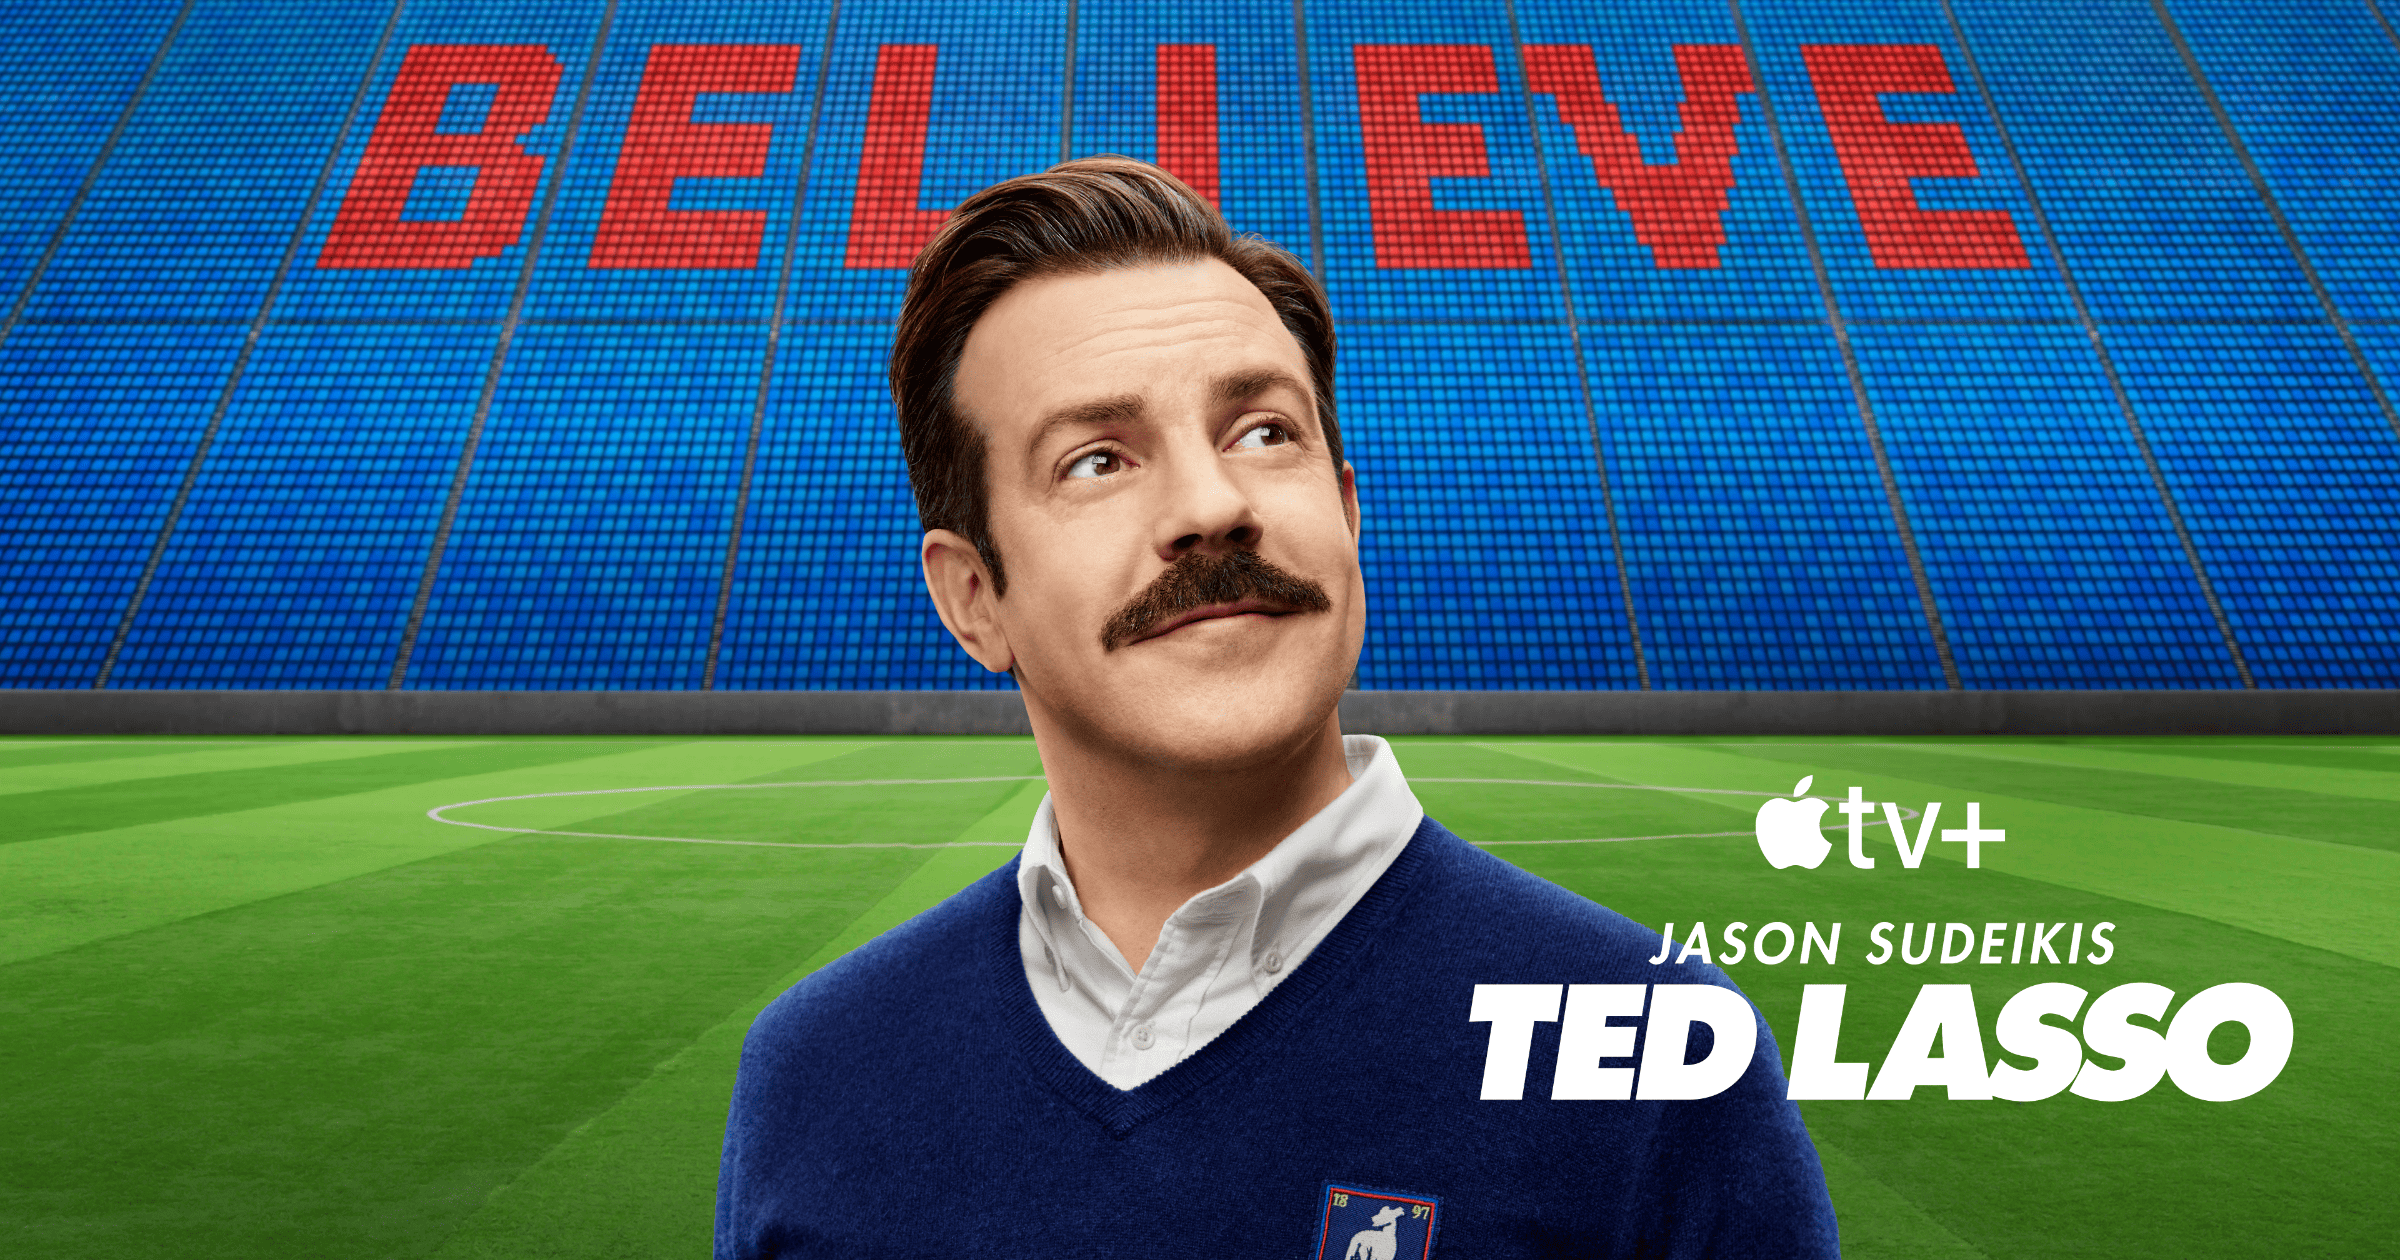 Ted Lasso and Premier League Agree Licensing Deal [Spoiler Alert]